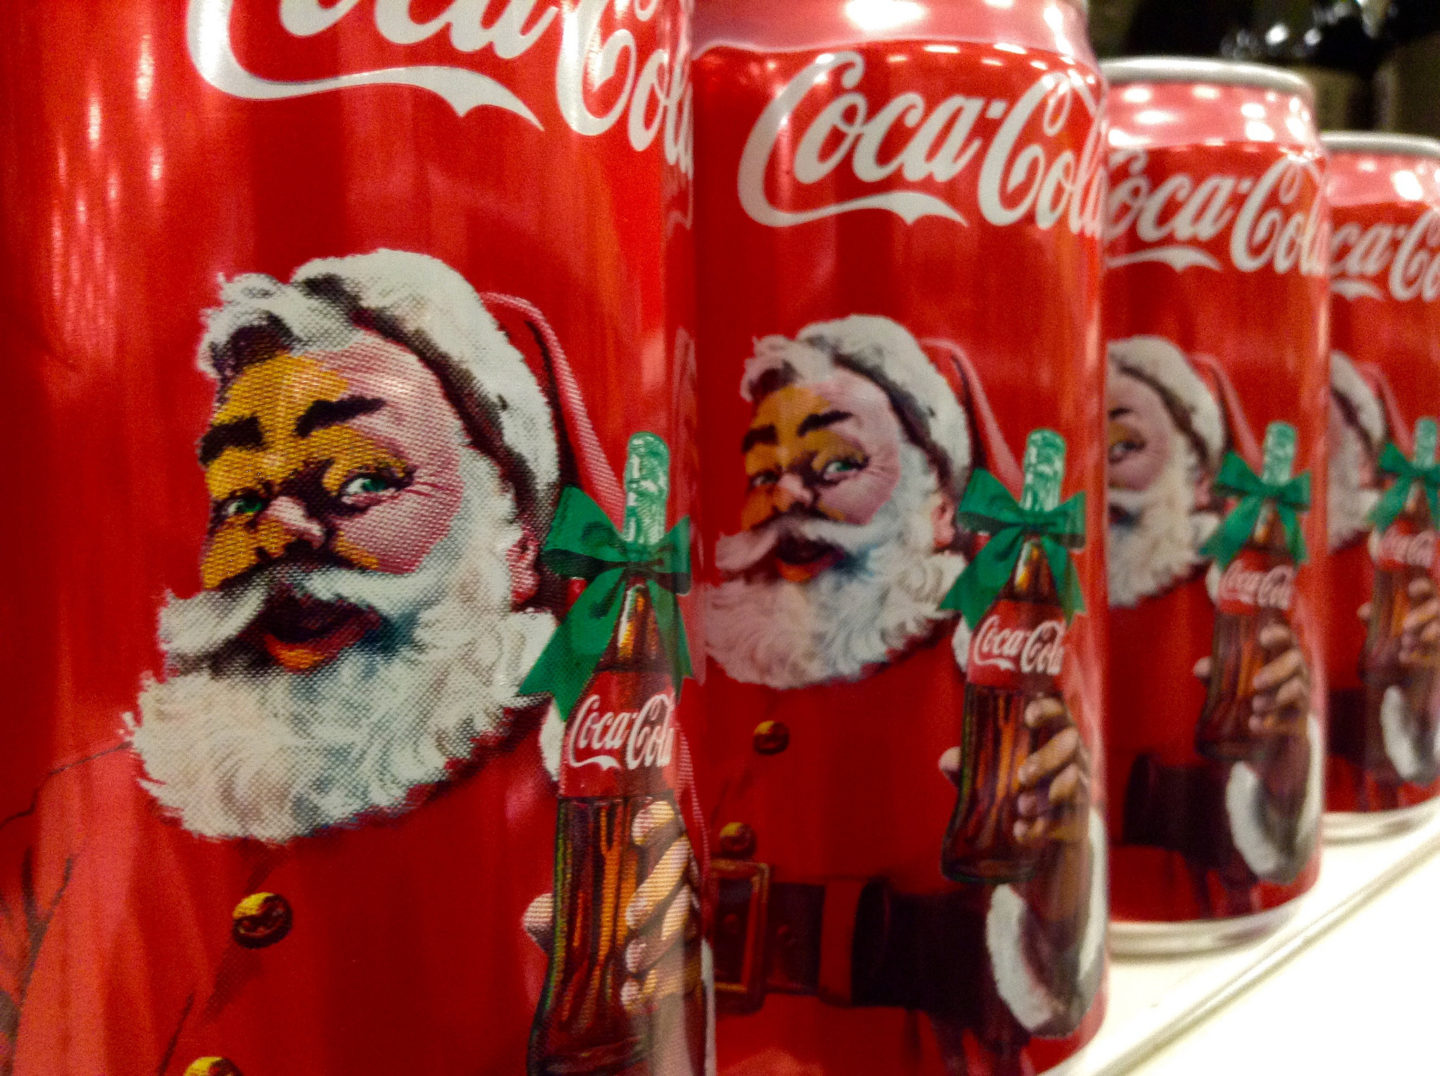 No, Santa Claus was not first dressed in red by Coca-Cola 3